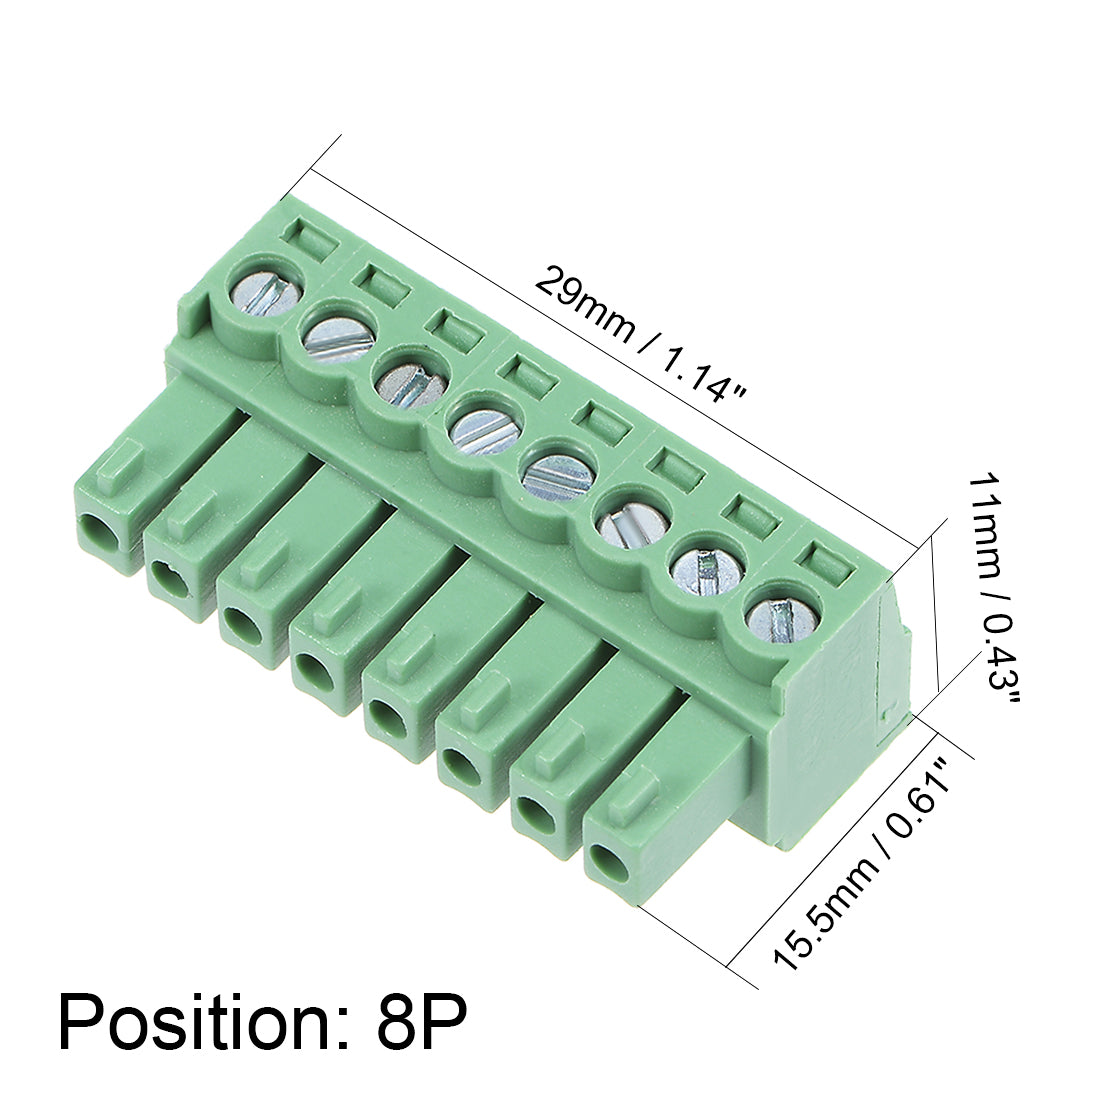 uxcell Uxcell 5Pcs AC300V 8A 3.5mm Pitch 8P Needle Seat Insert-In PCB Terminal Block green